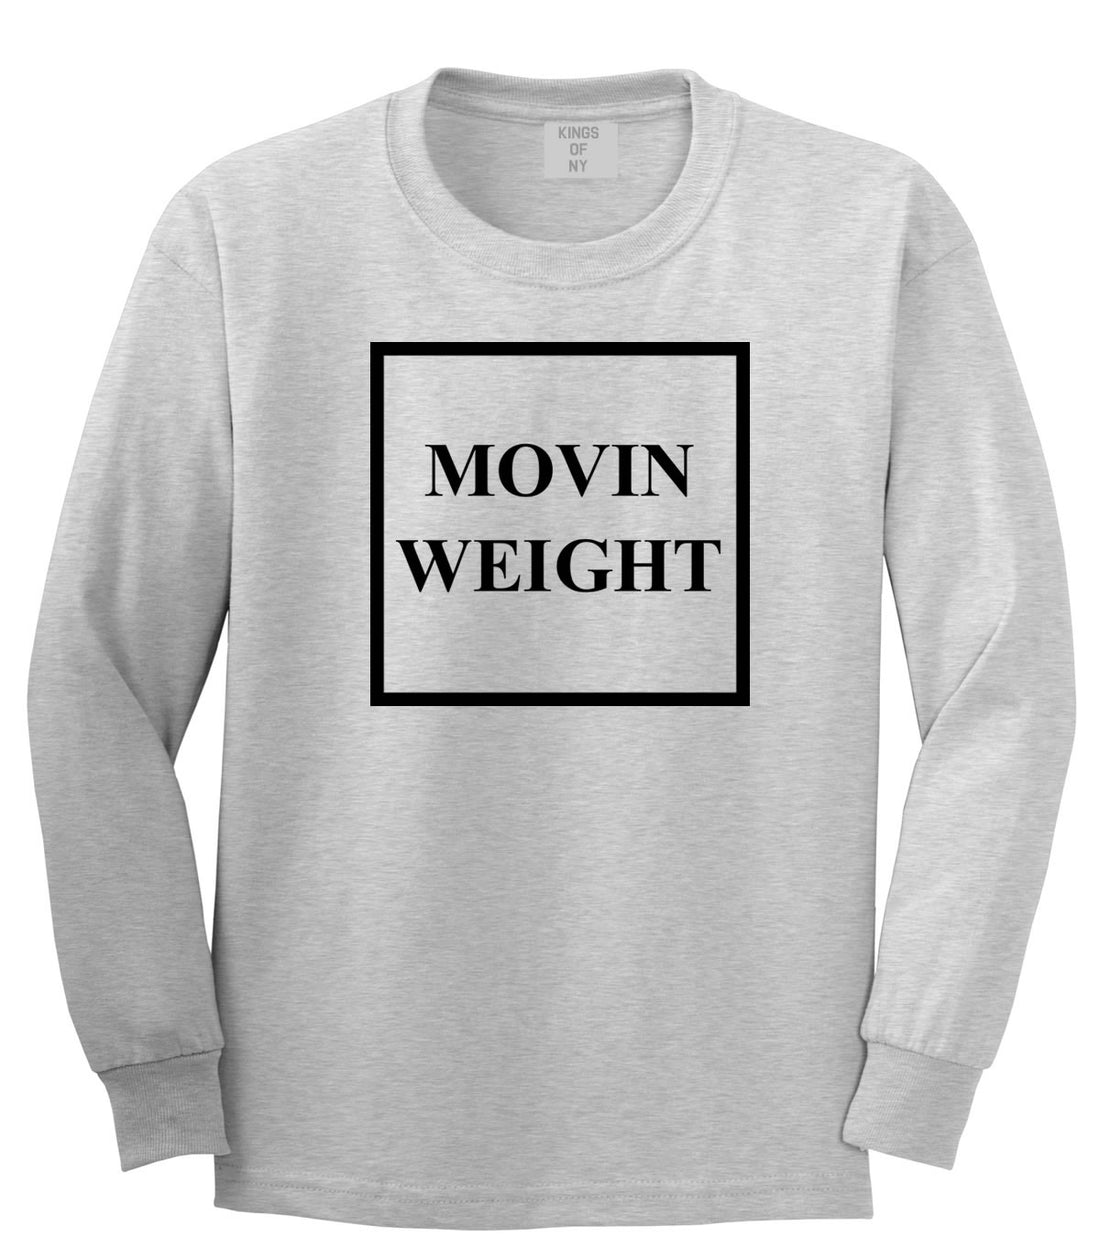 Movin Weight Hustler Boys Kids Long Sleeve T-Shirt in Grey by Kings Of NY